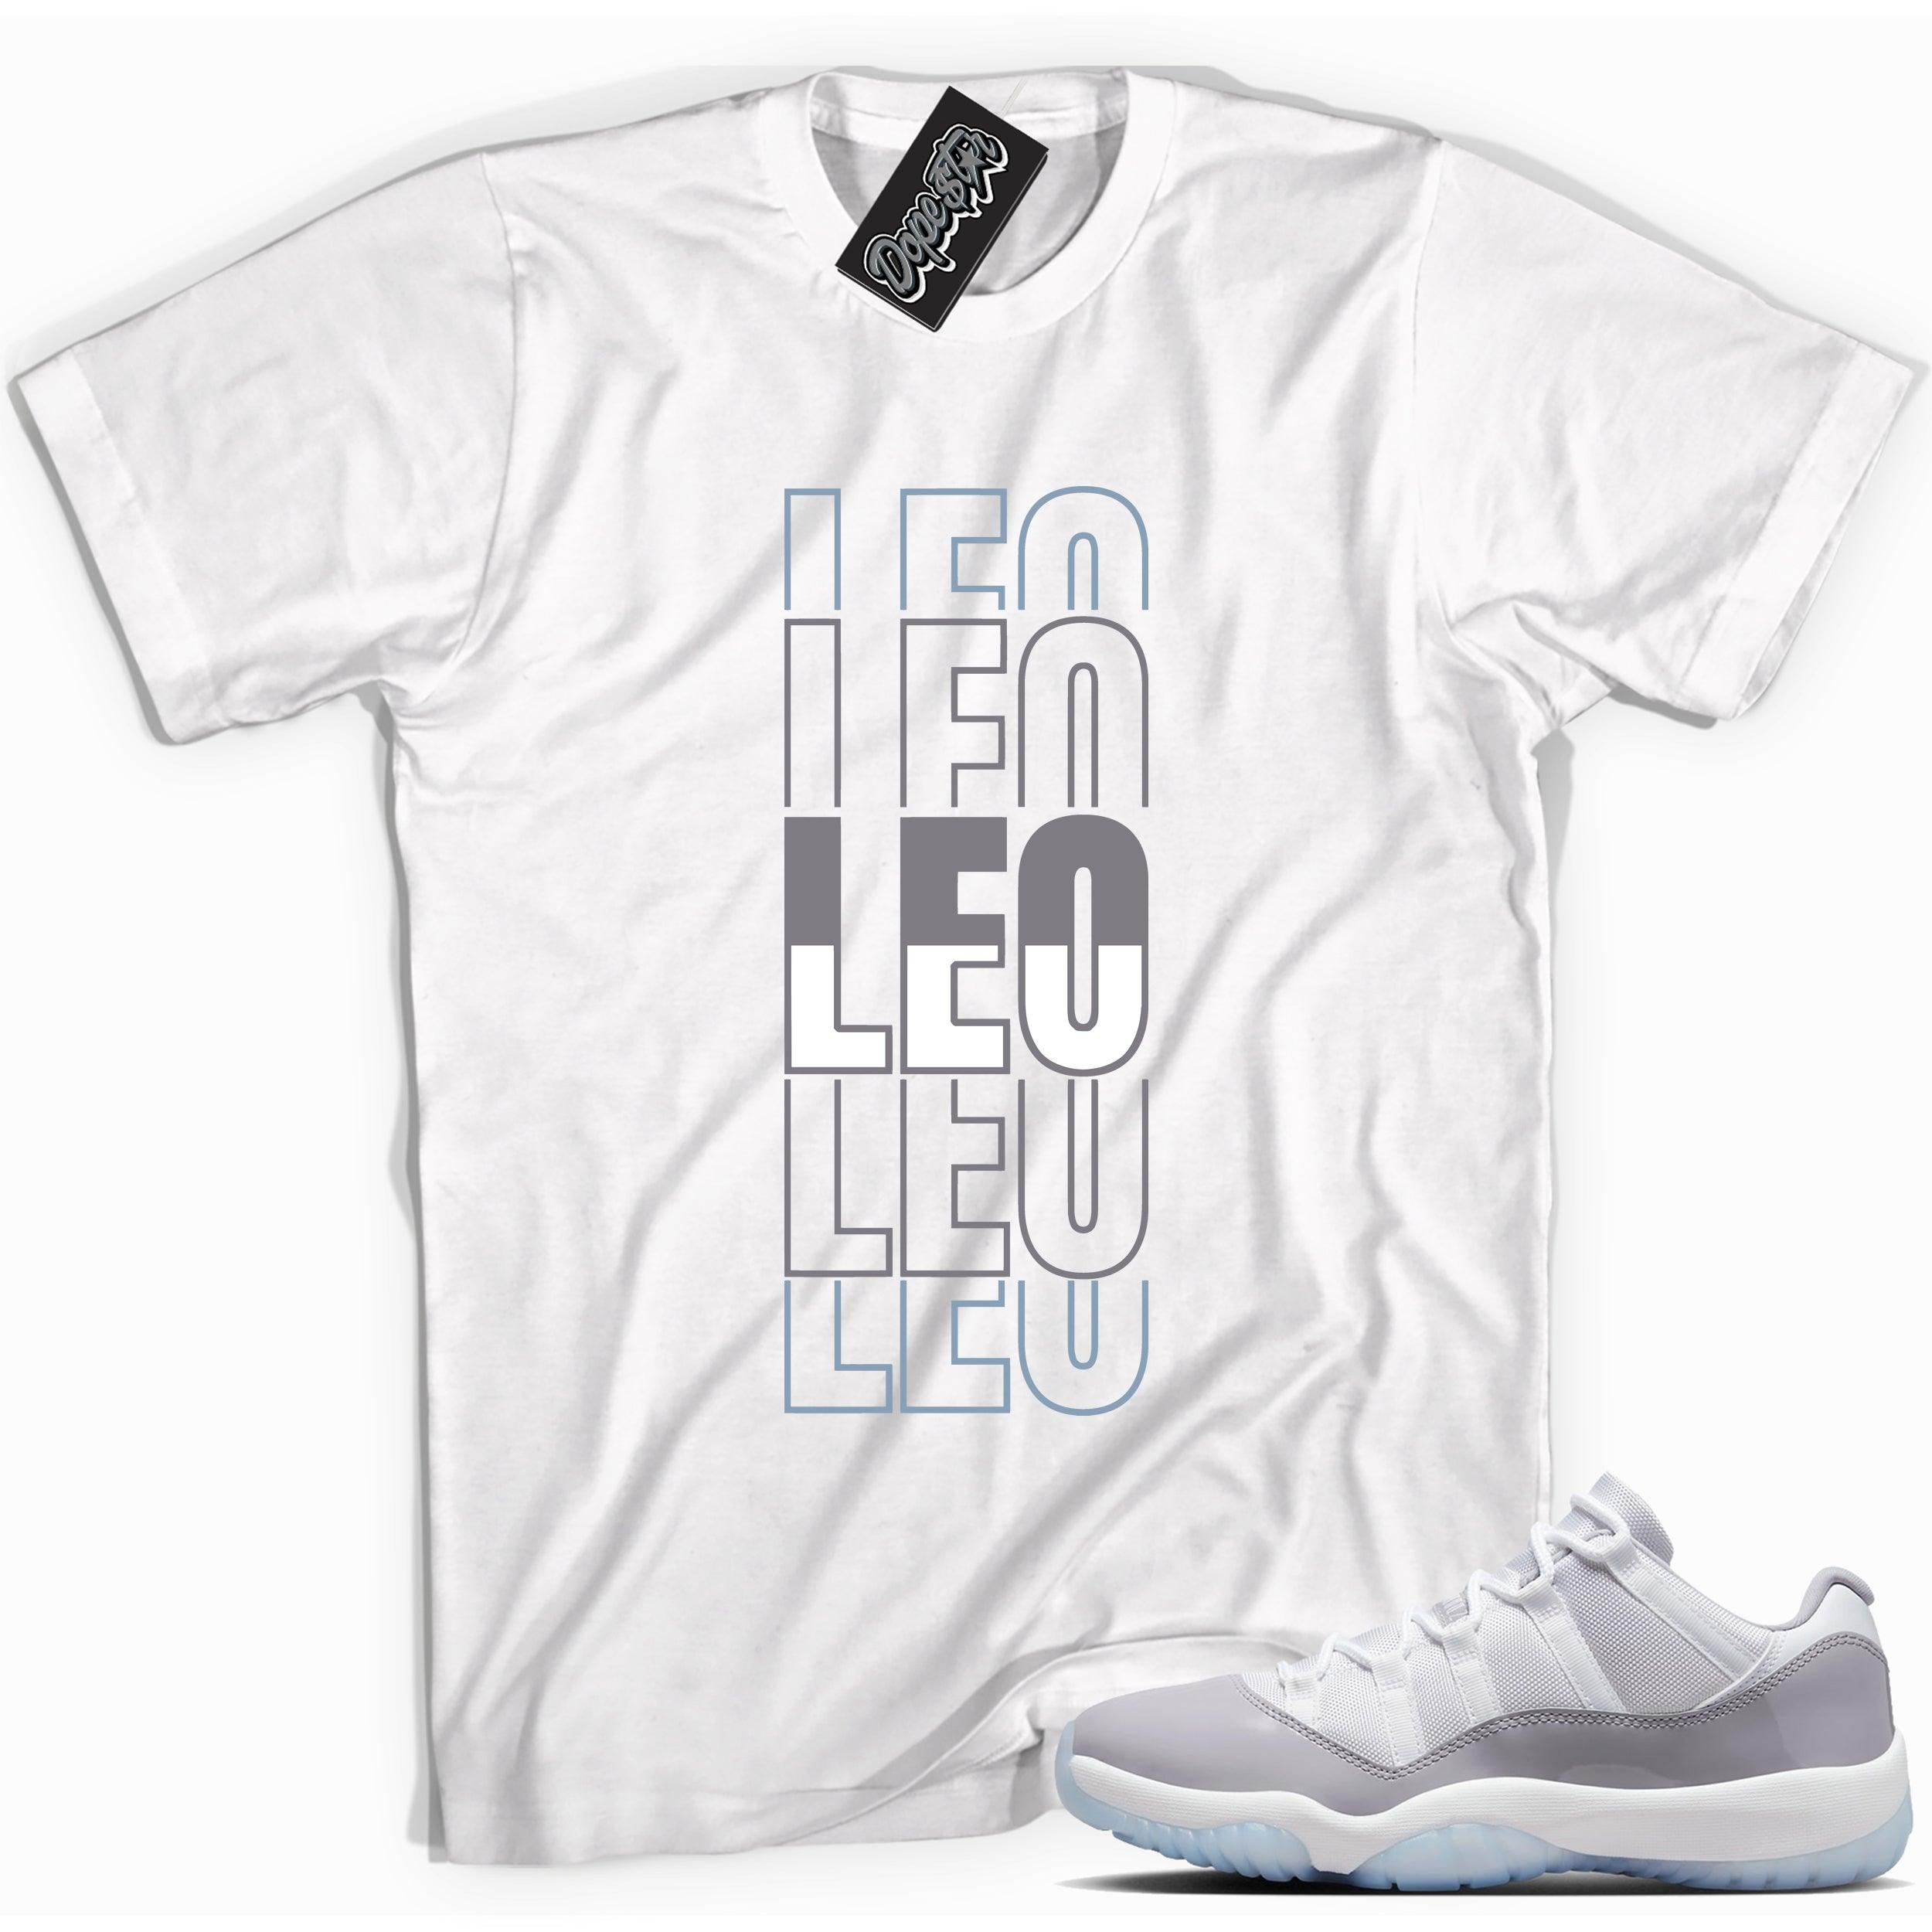 Cool White graphic tee with “ LEO ” print, that perfectly matches Air Jordan 11 Retro Low Cement Grey sneakers 